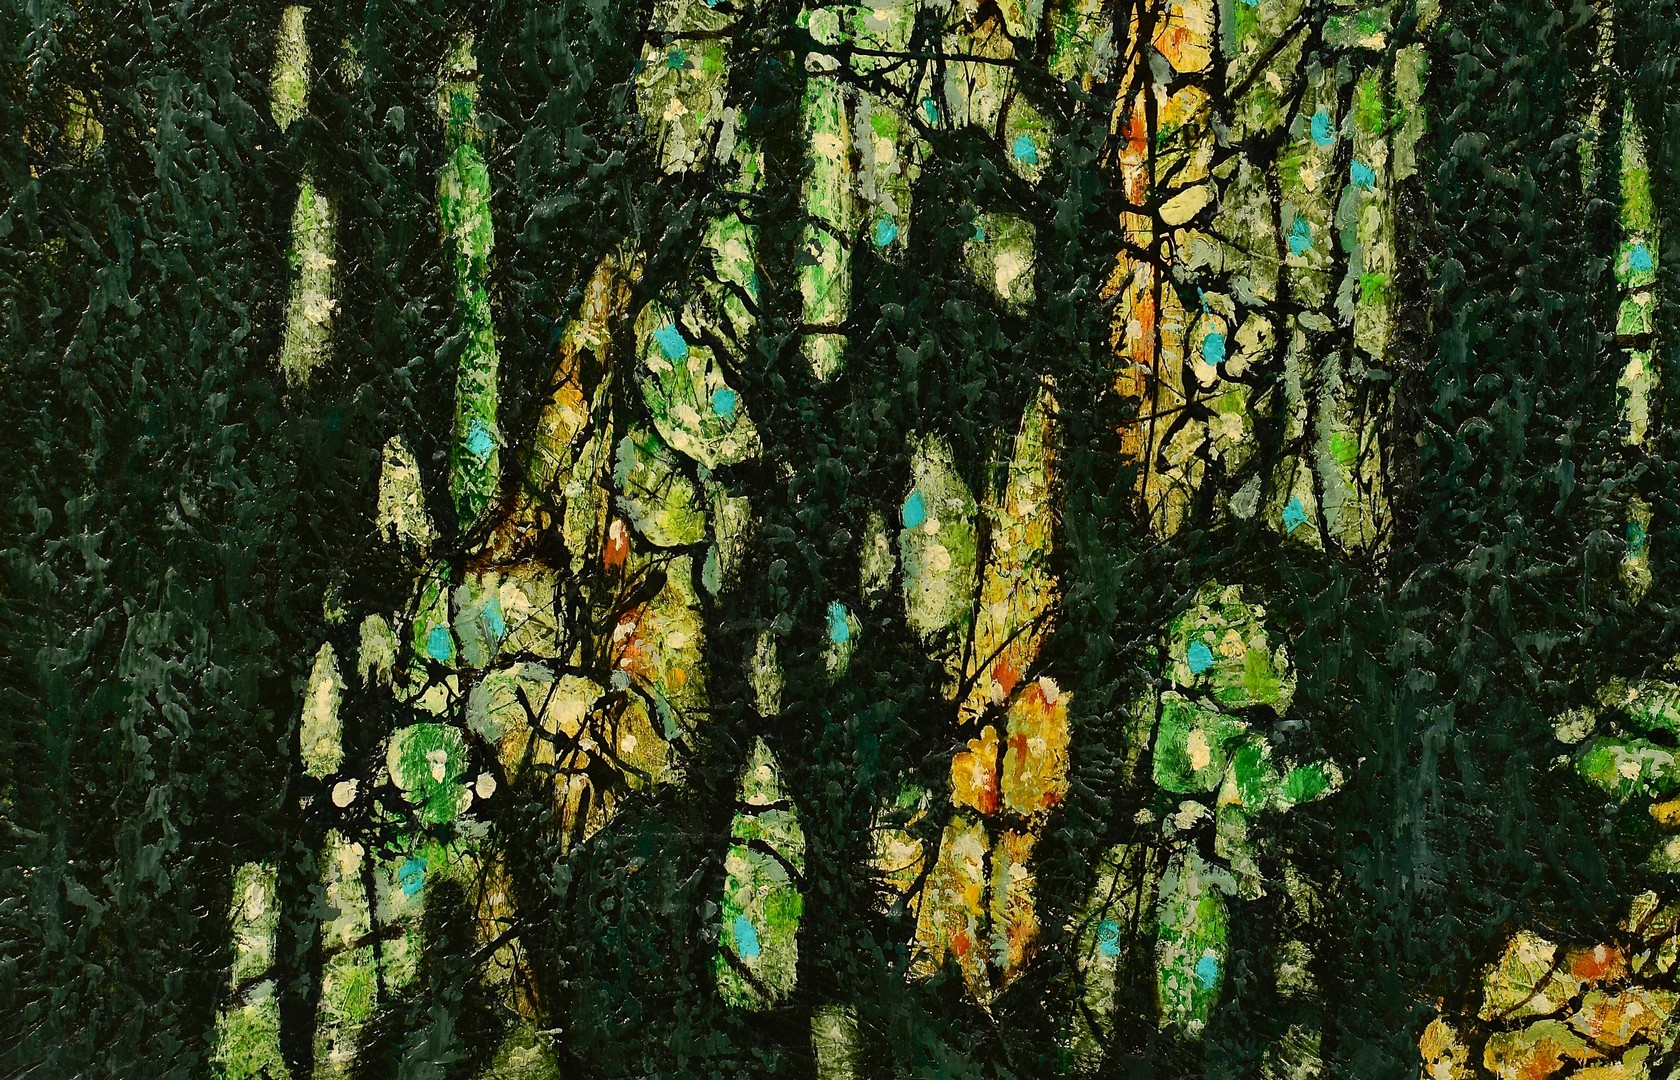 Lot 424: Harold Wahl Large Abstract, Rainforest